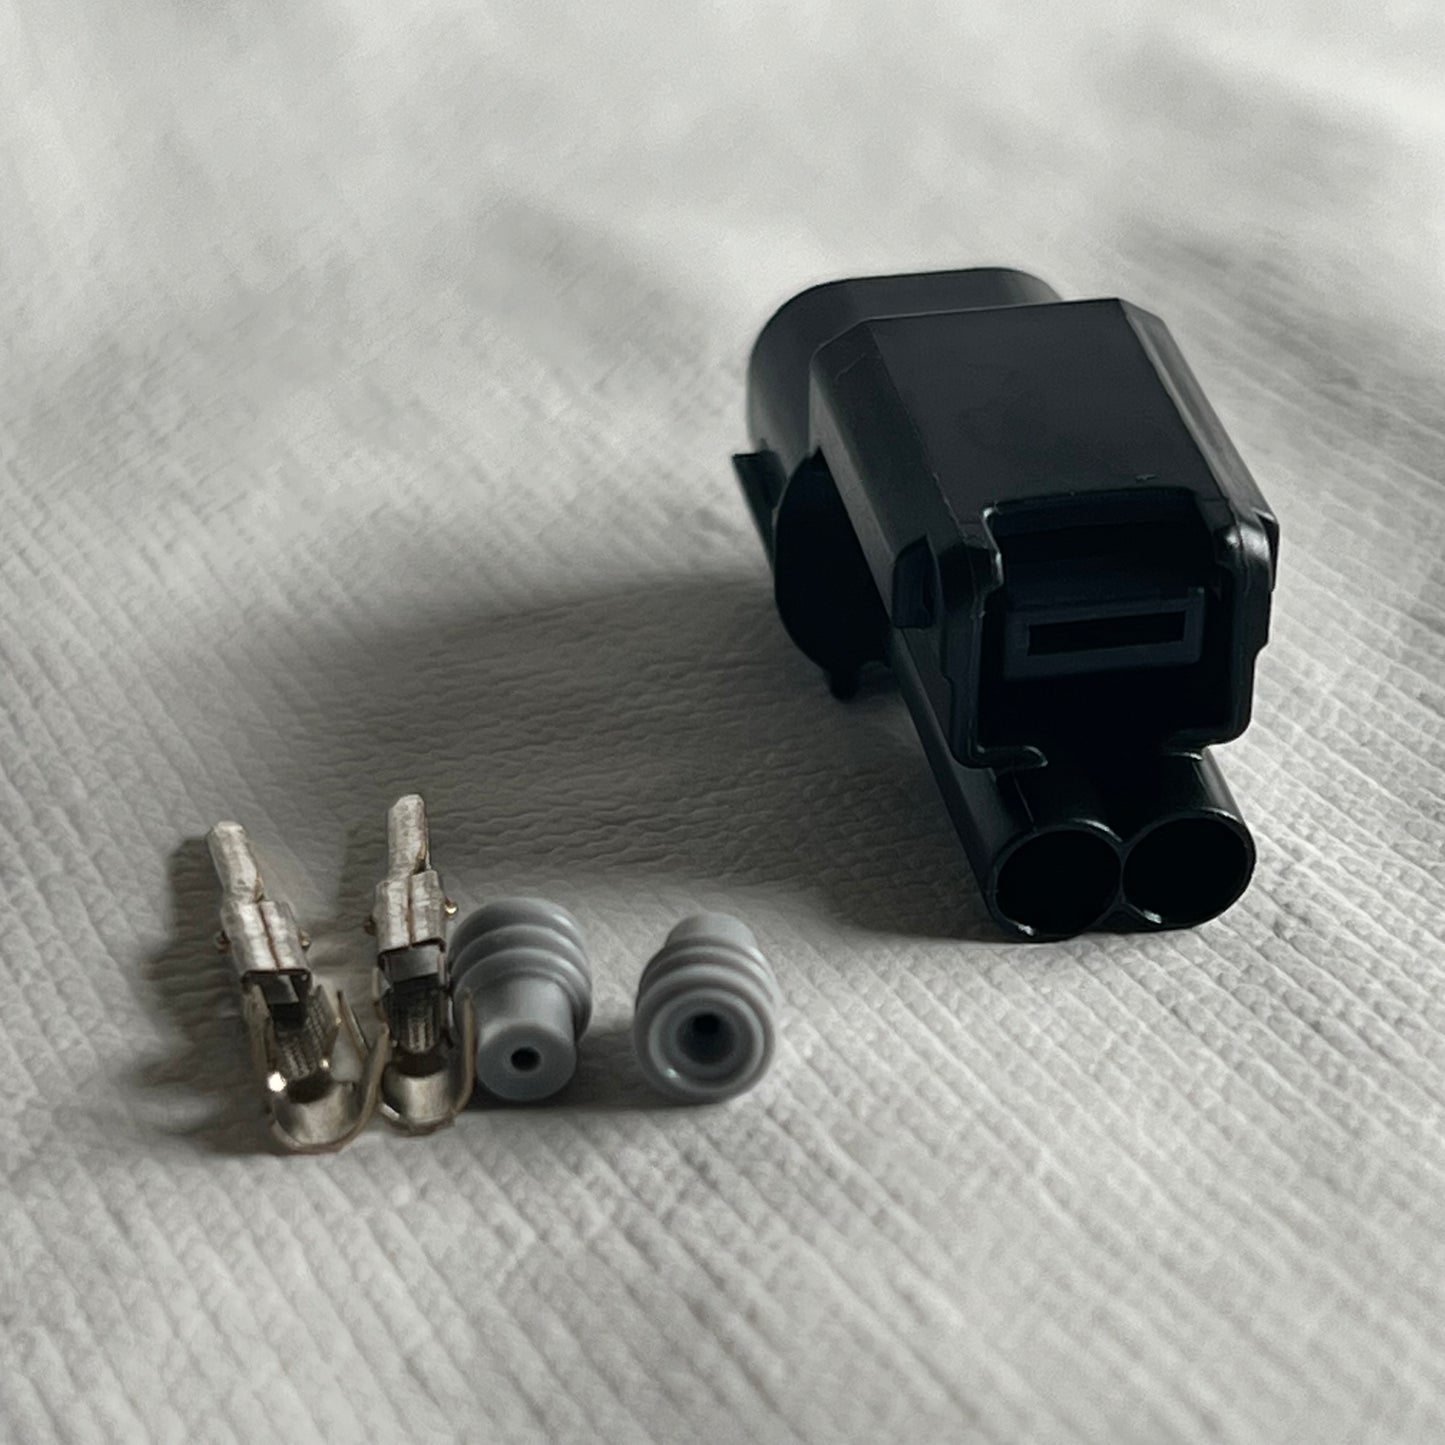 CRF300L/CRF300 RALLY MALE (BIKE SIDE) ACCESSORY CONNECTOR